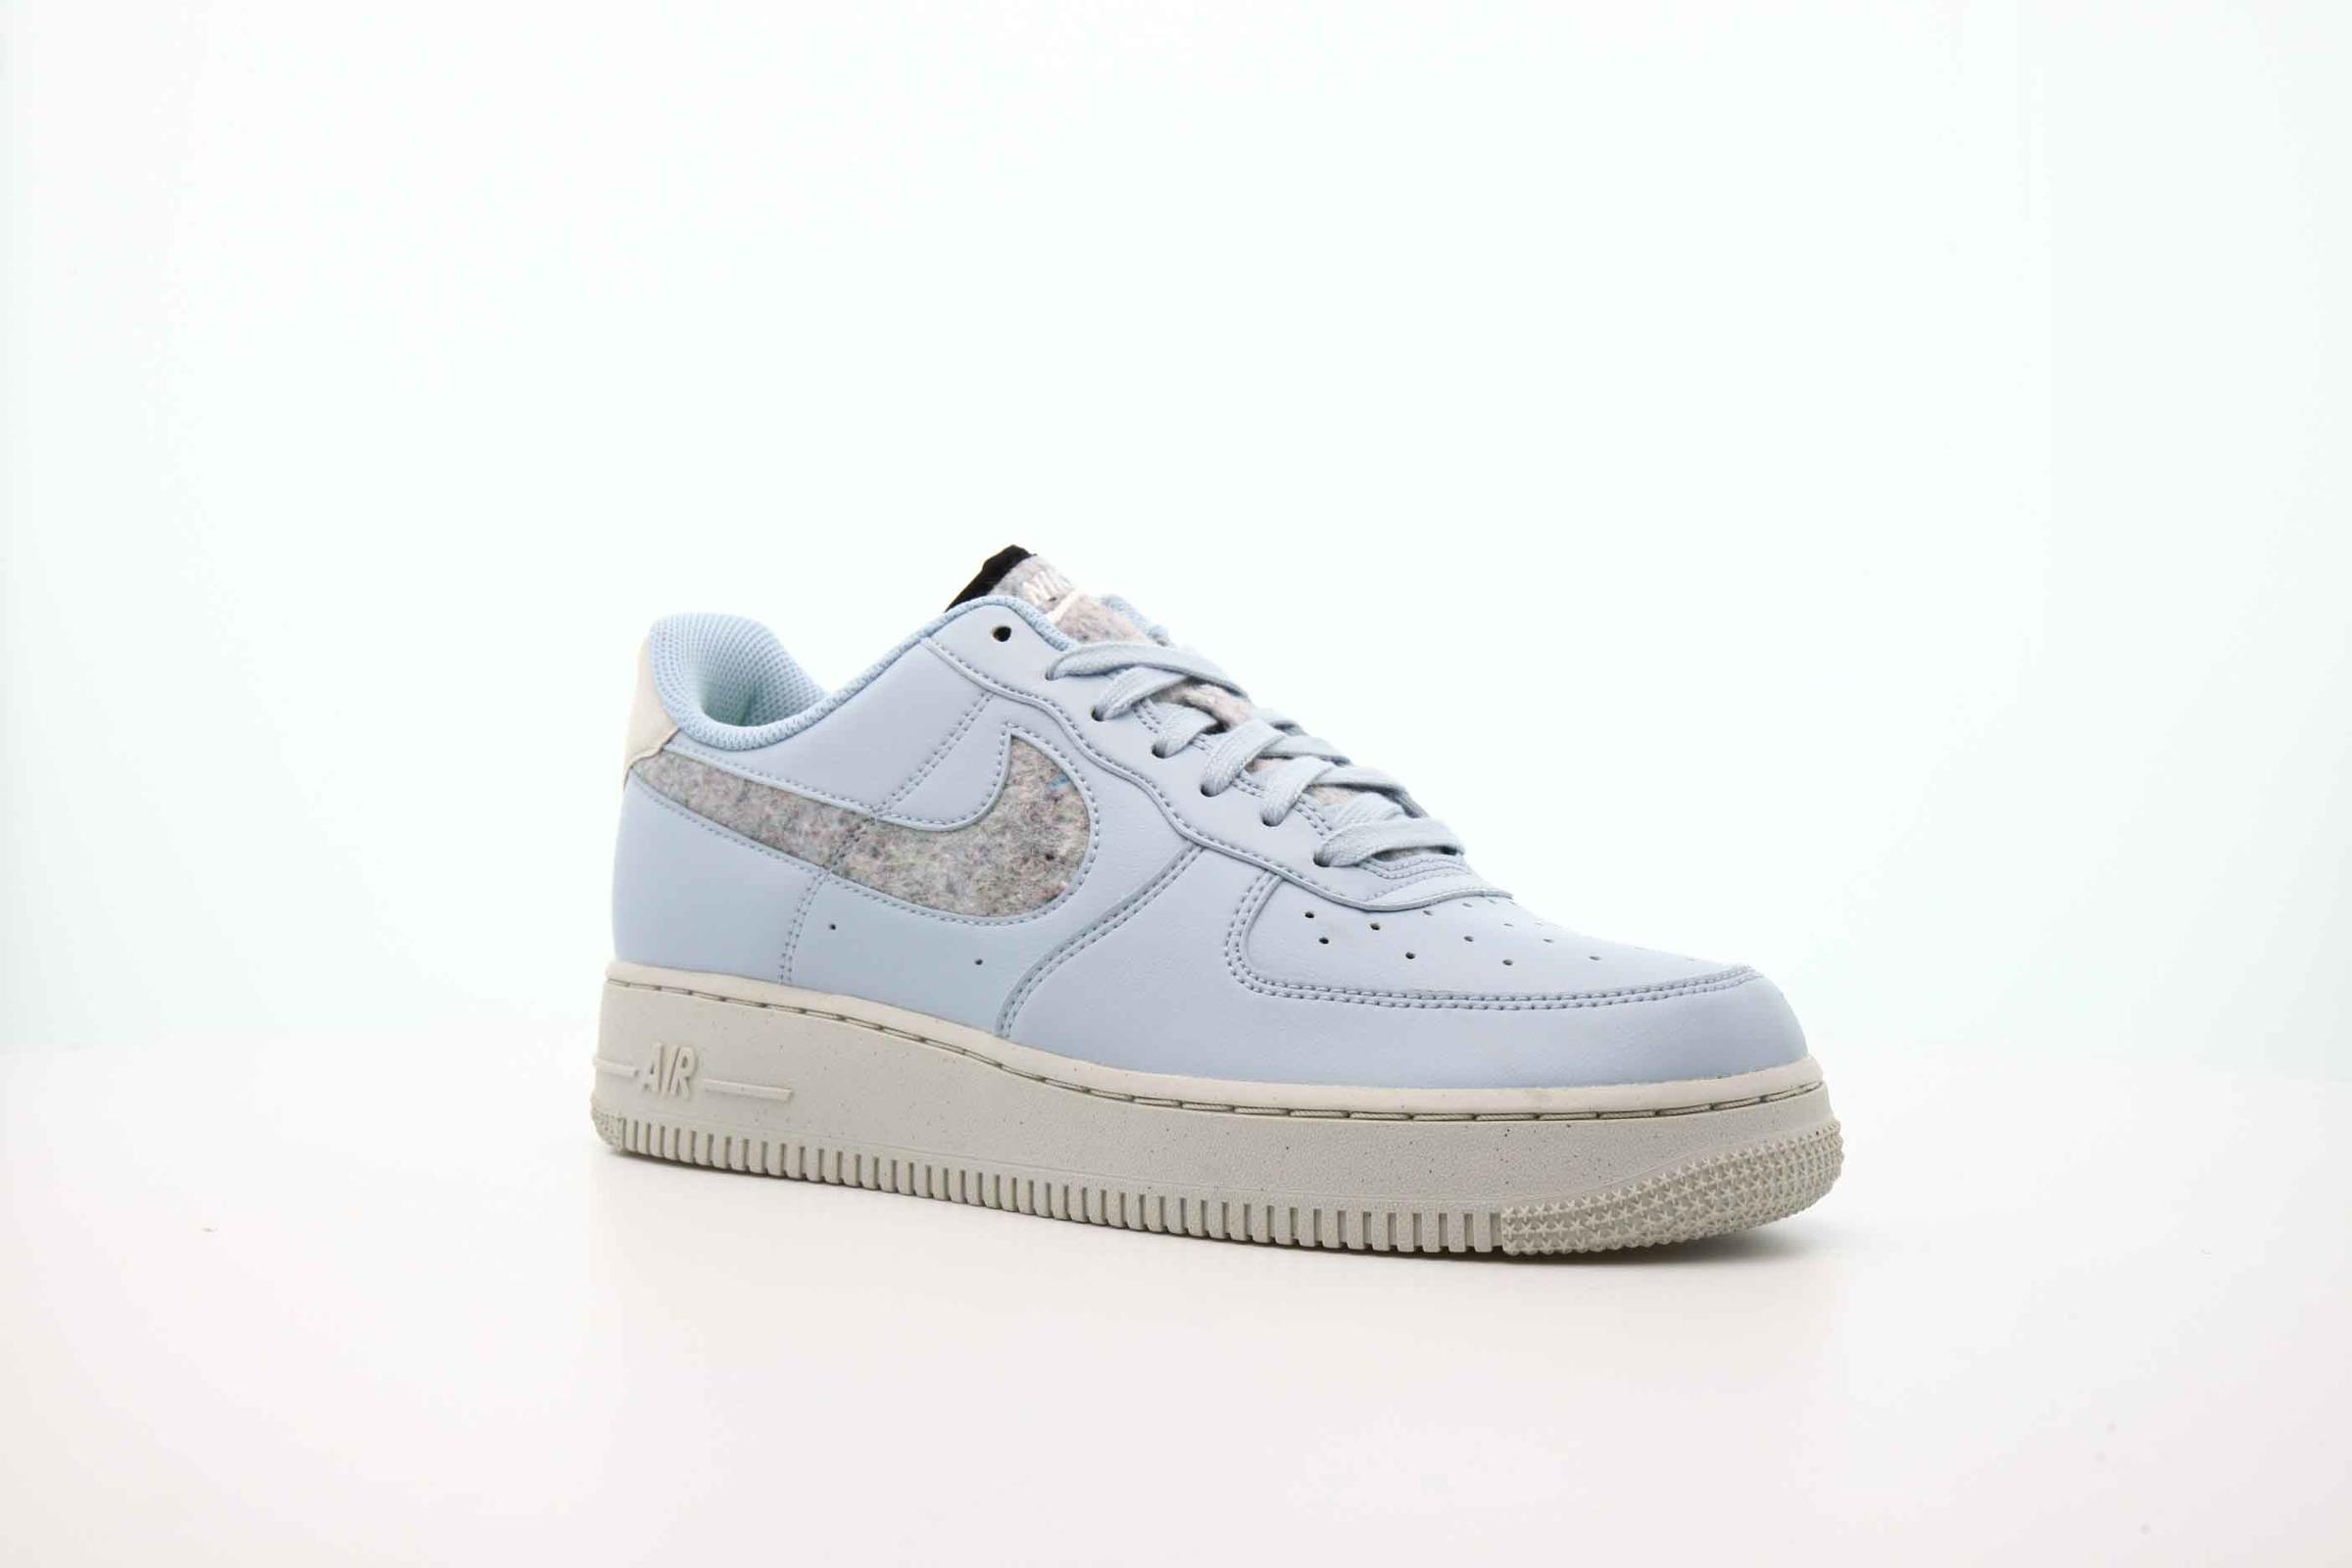 Nike WMNS AIR FORCE 1 '07 SE "ARMORY BLUE"